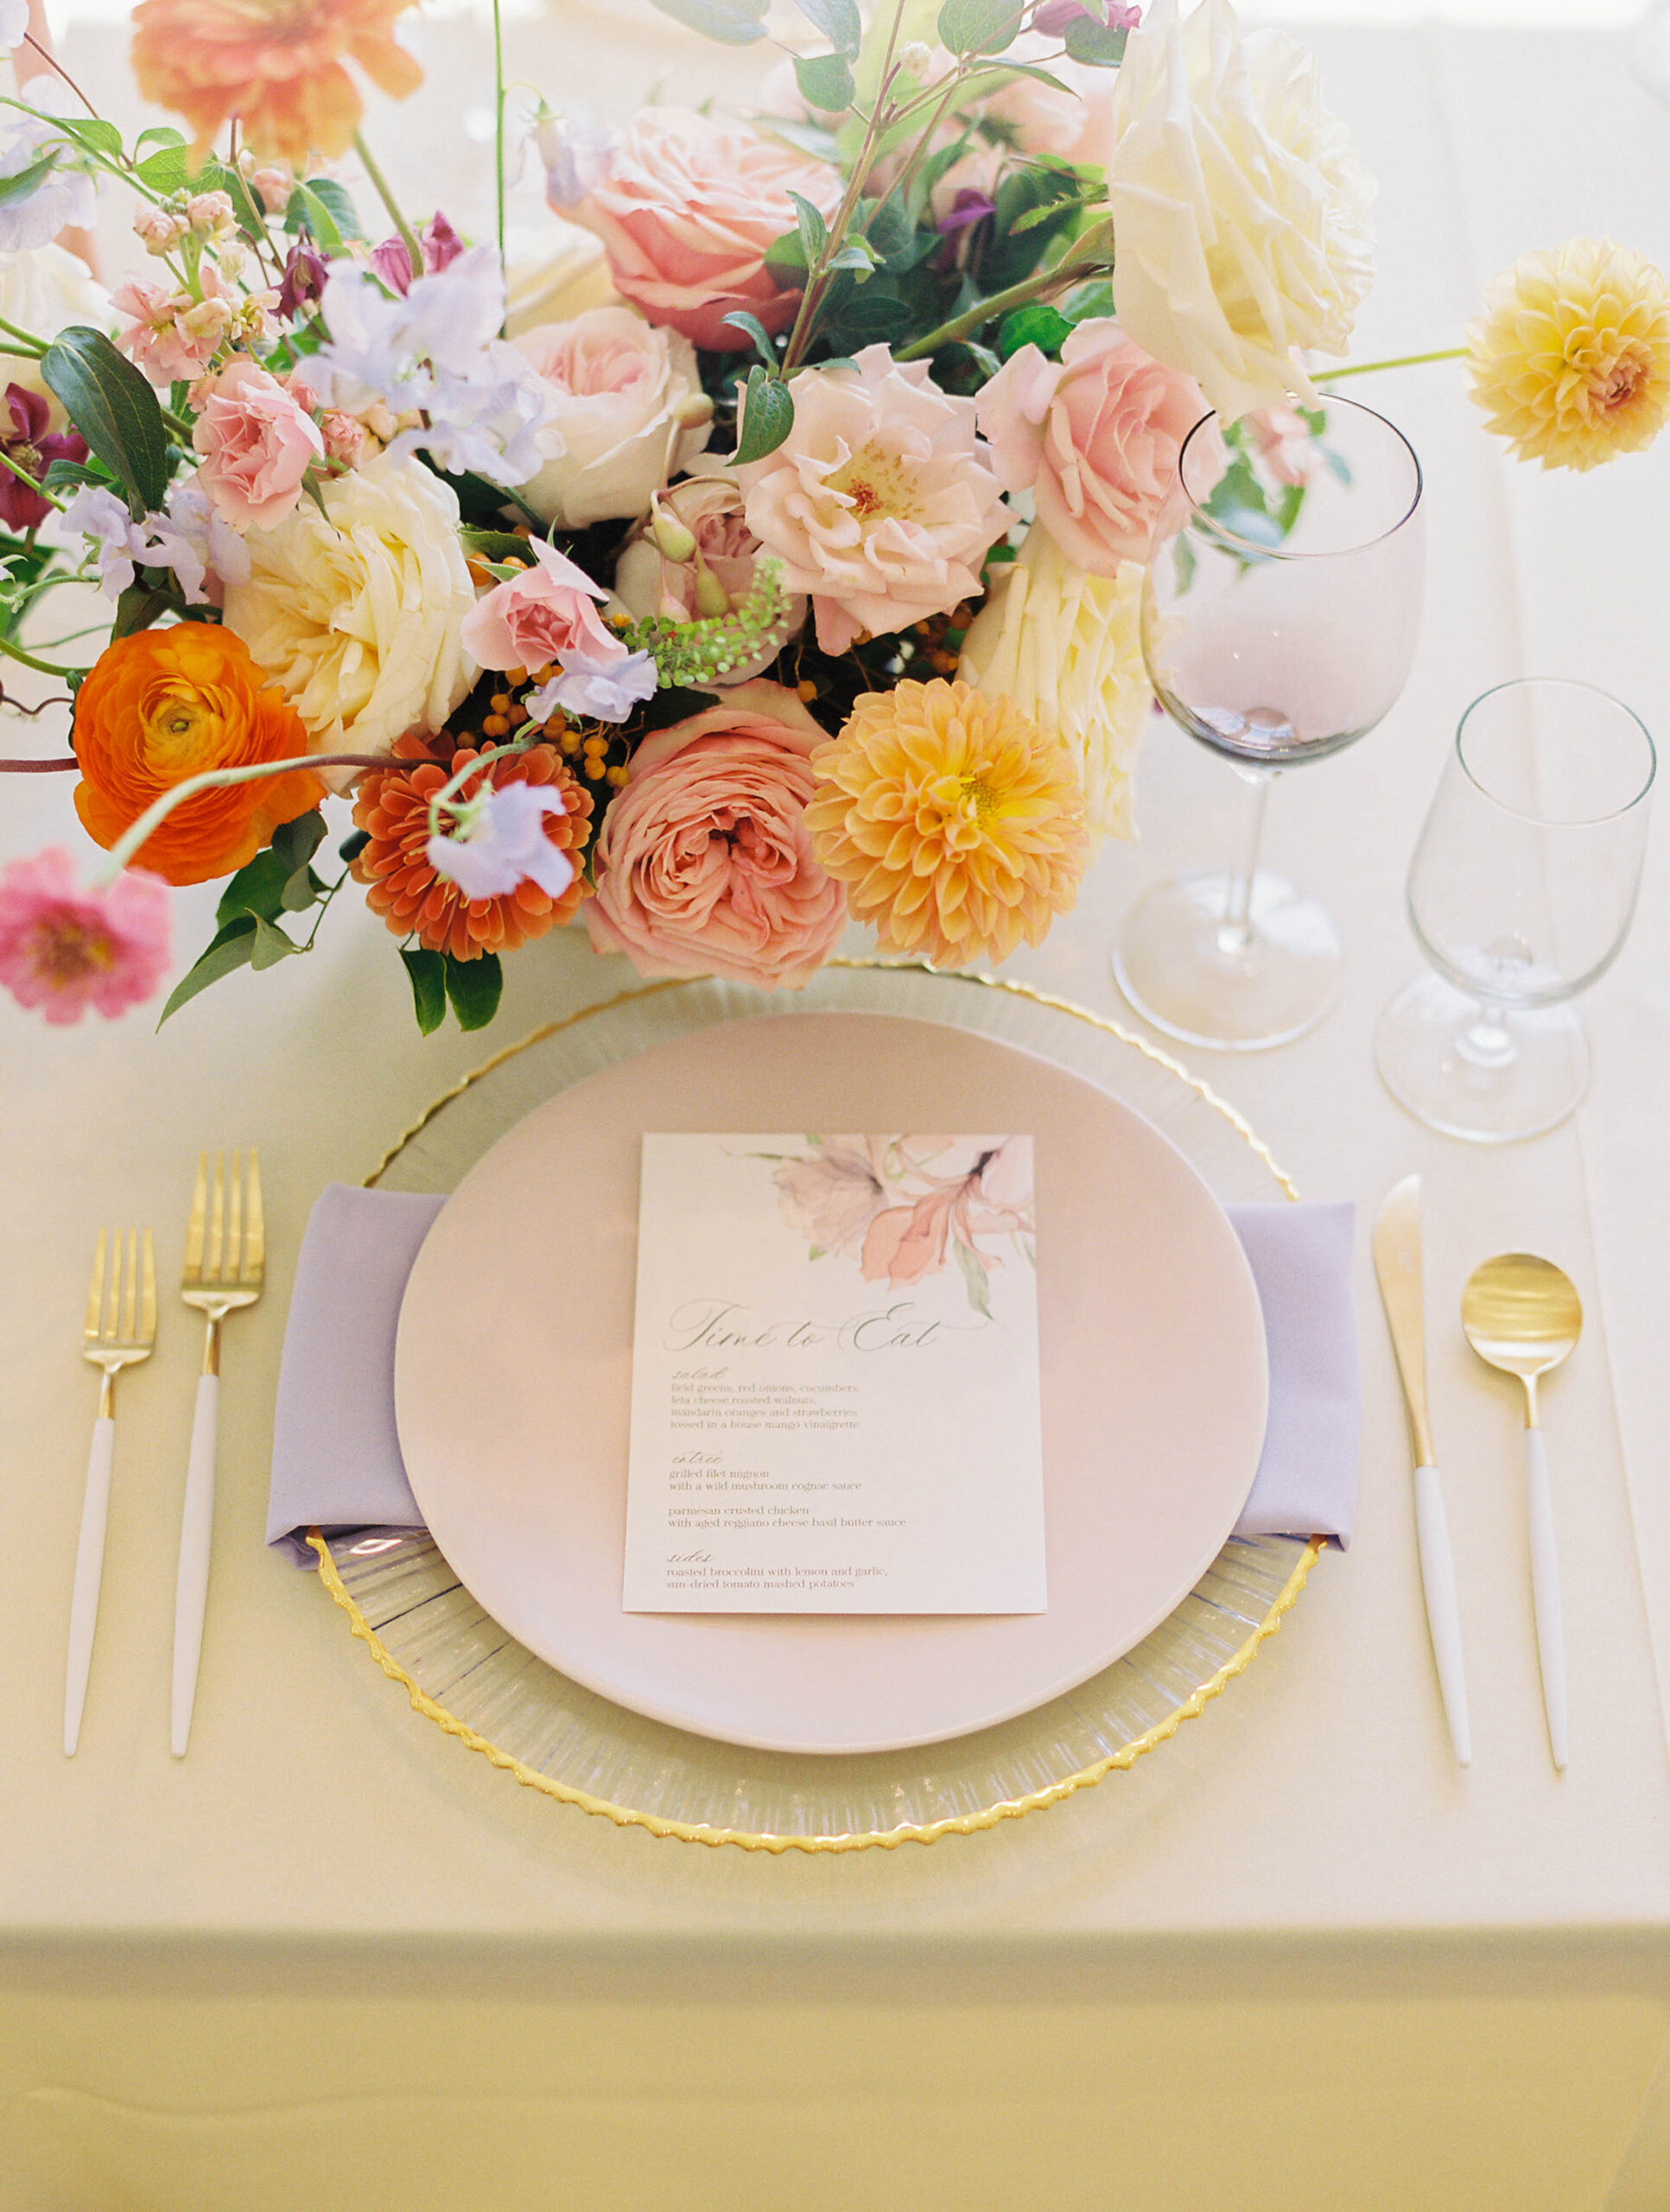 wedding reception table place setting with colorful floral arrangement